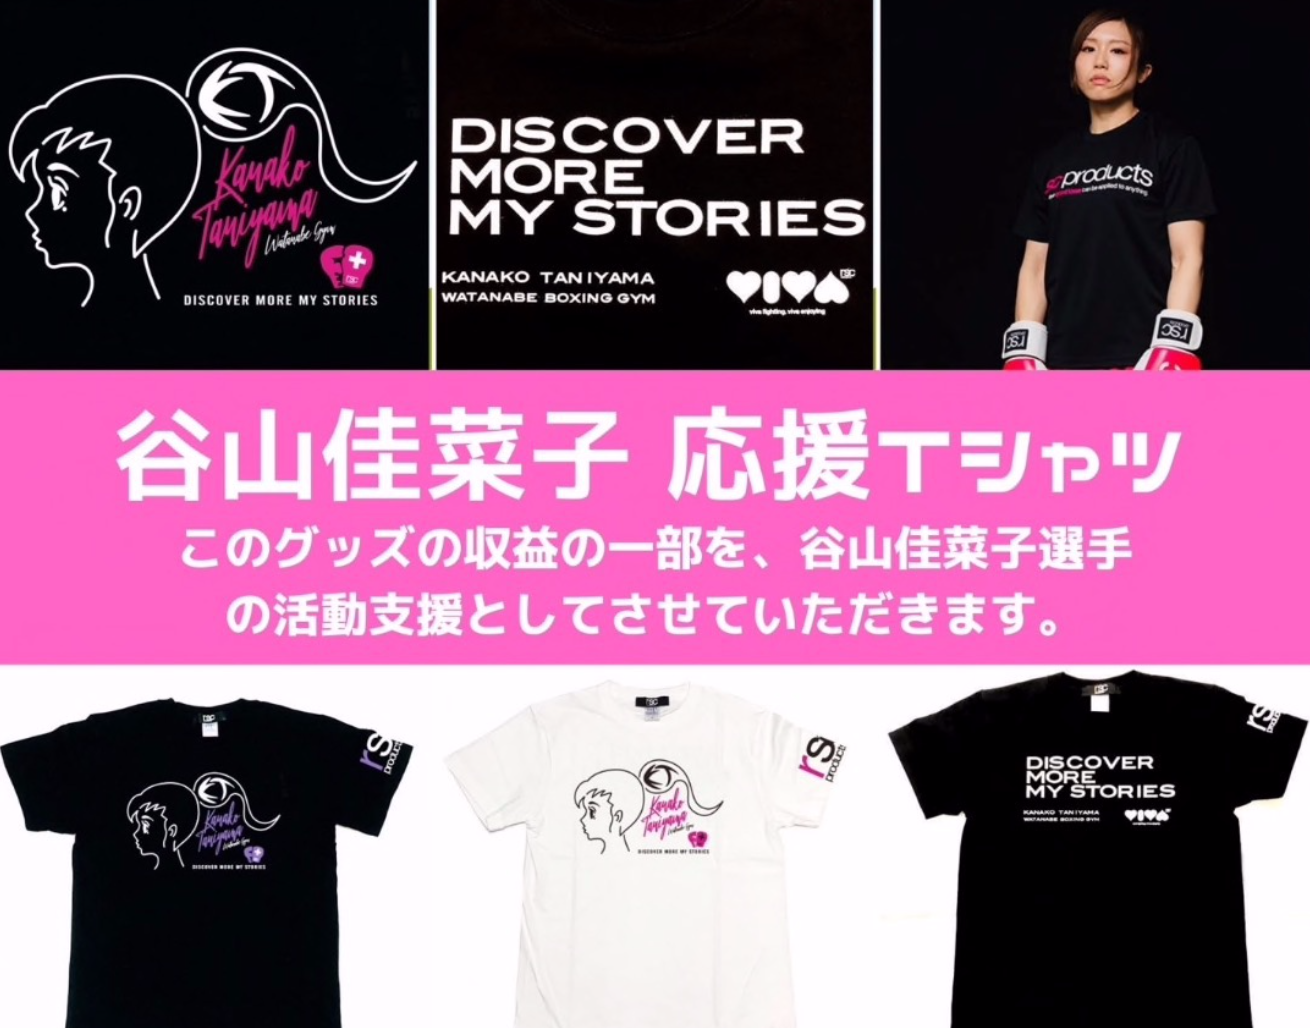 DISCOVER MORE MY STORIES★ 信じた道をまっすぐに 画像5｜rsc products公式ウェブサイト